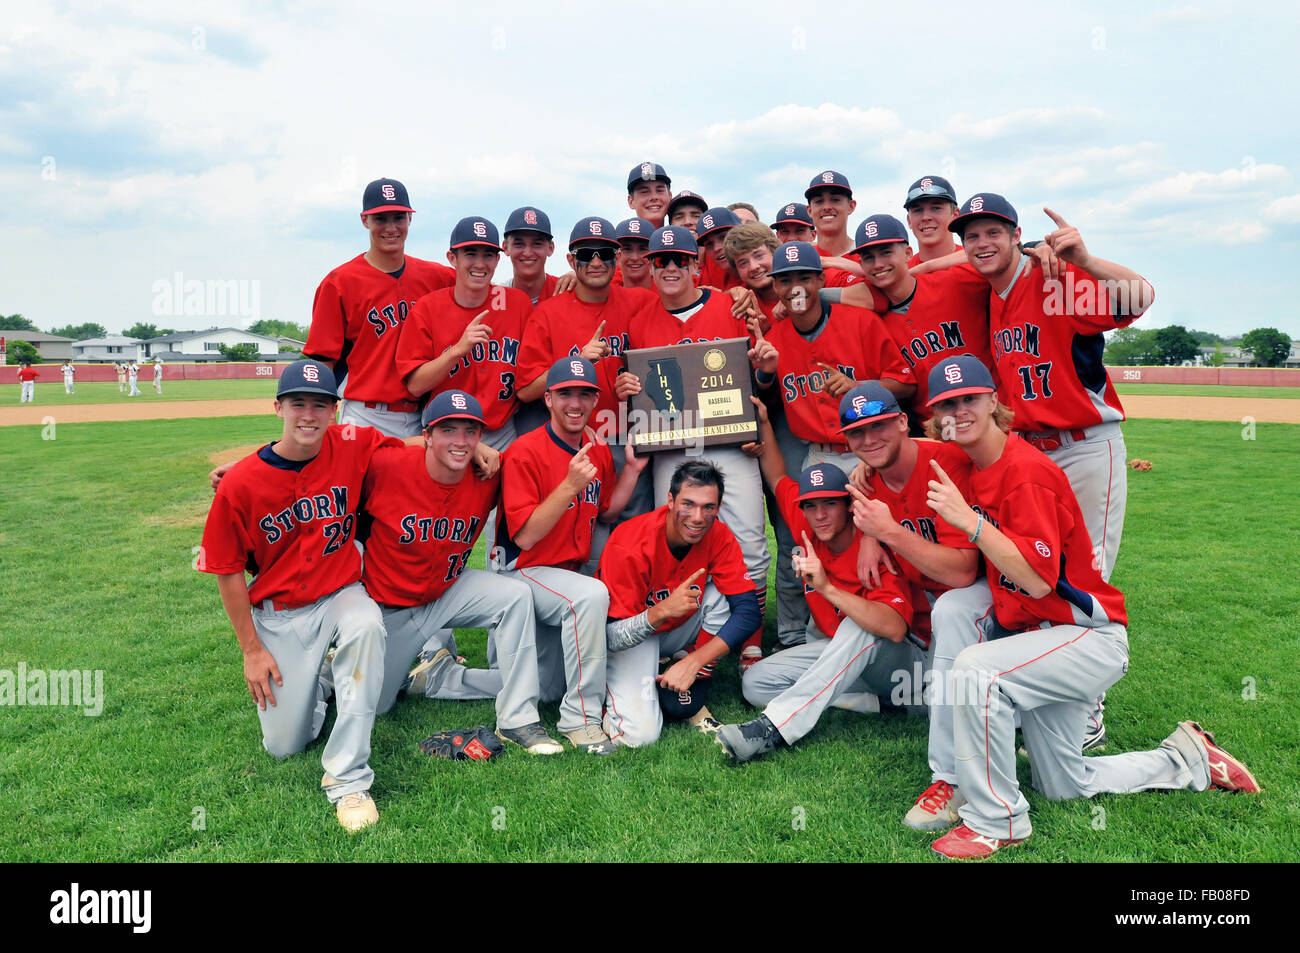 High school baseball team players surround the state sectional title plaque they had just earned on the field. USA. Stock Photo